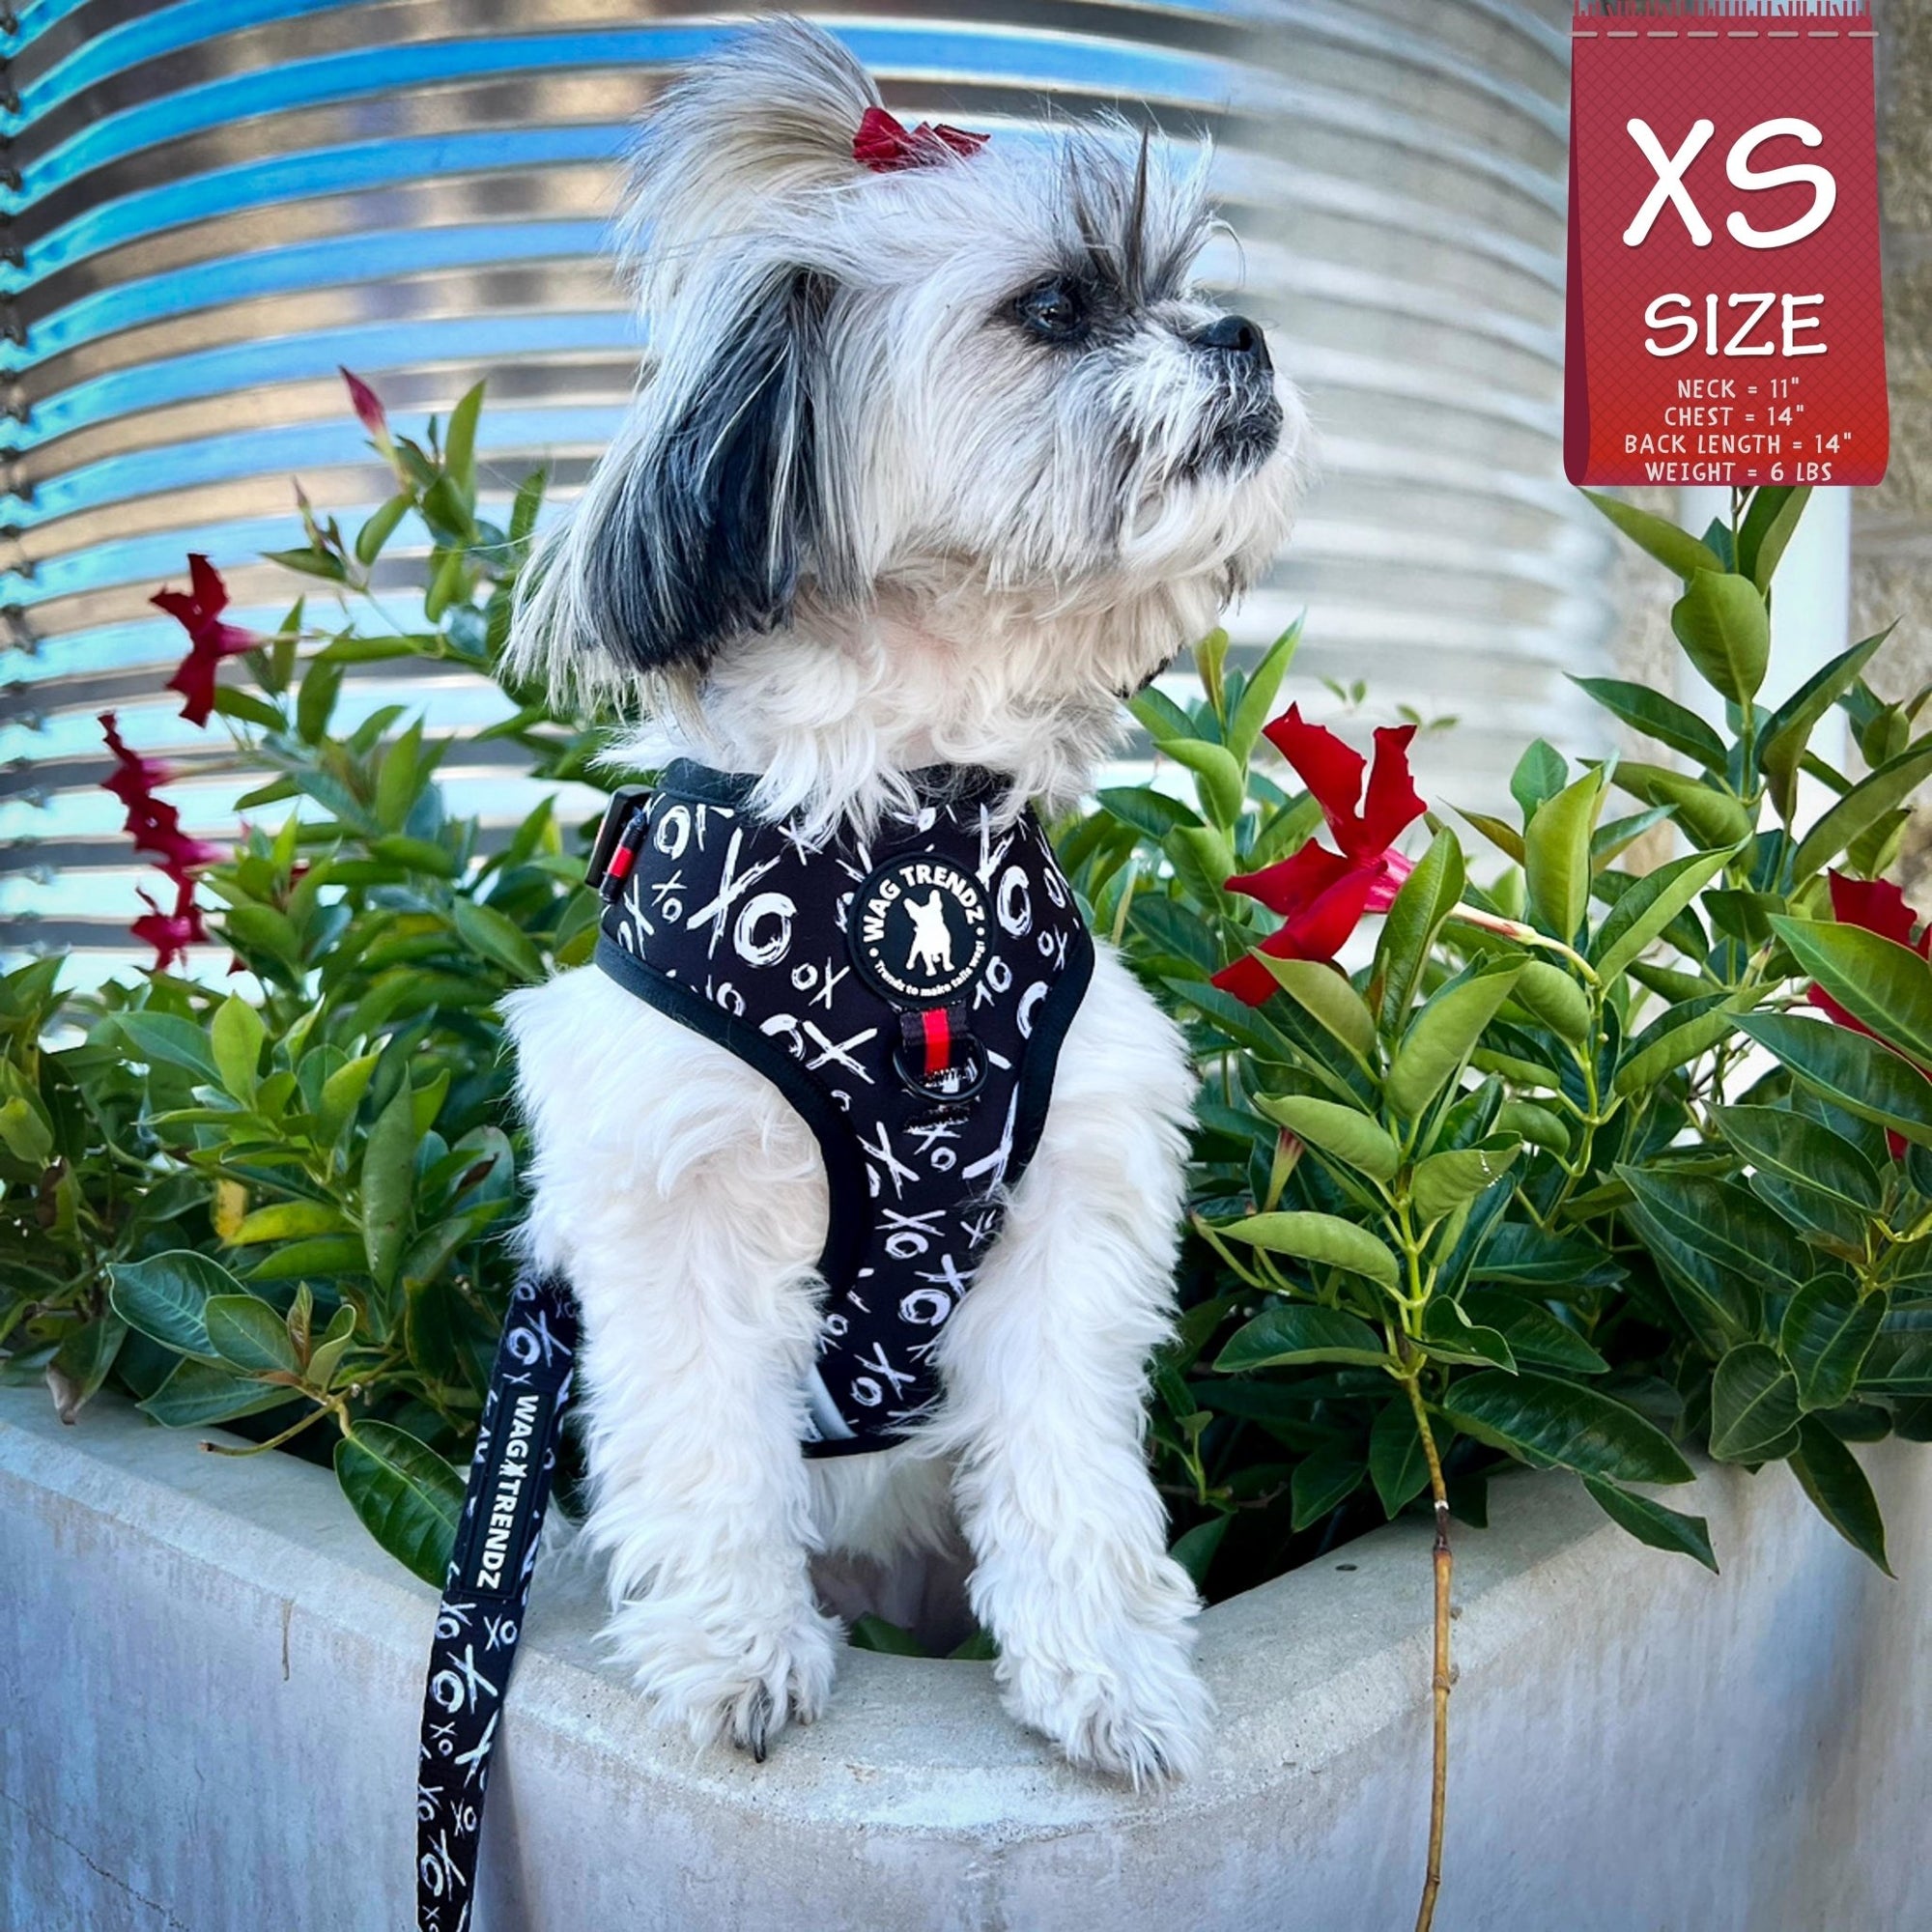 Dog Harness Vests - Adjustable - Front Clip - cute black and white small dog wearing black harness with white XO&#39;s and red accents with matching dog leash - outside with red flowers and a metal silo in the background - Wag Trendz